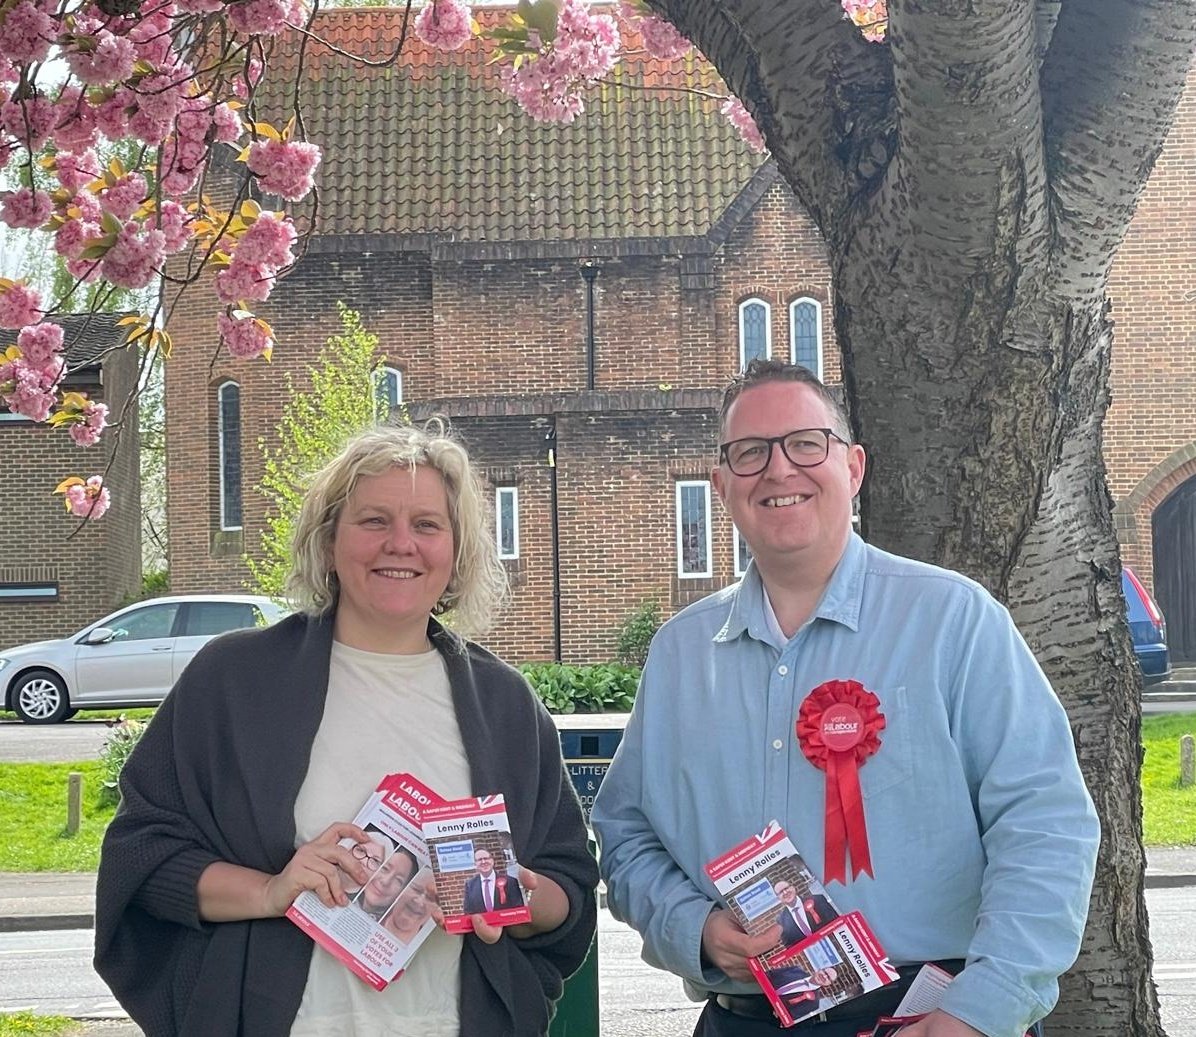 Great to join @UKLabour Parliamentary candidate @MDawkinsLabour for #Faversham & Mid Kent on the campaign trail in #Maidstone today with @MaidstoneLabour discussing #crime & #Policing with residents Great to hear people switching to Labour from the Tories #LabourDoorstep